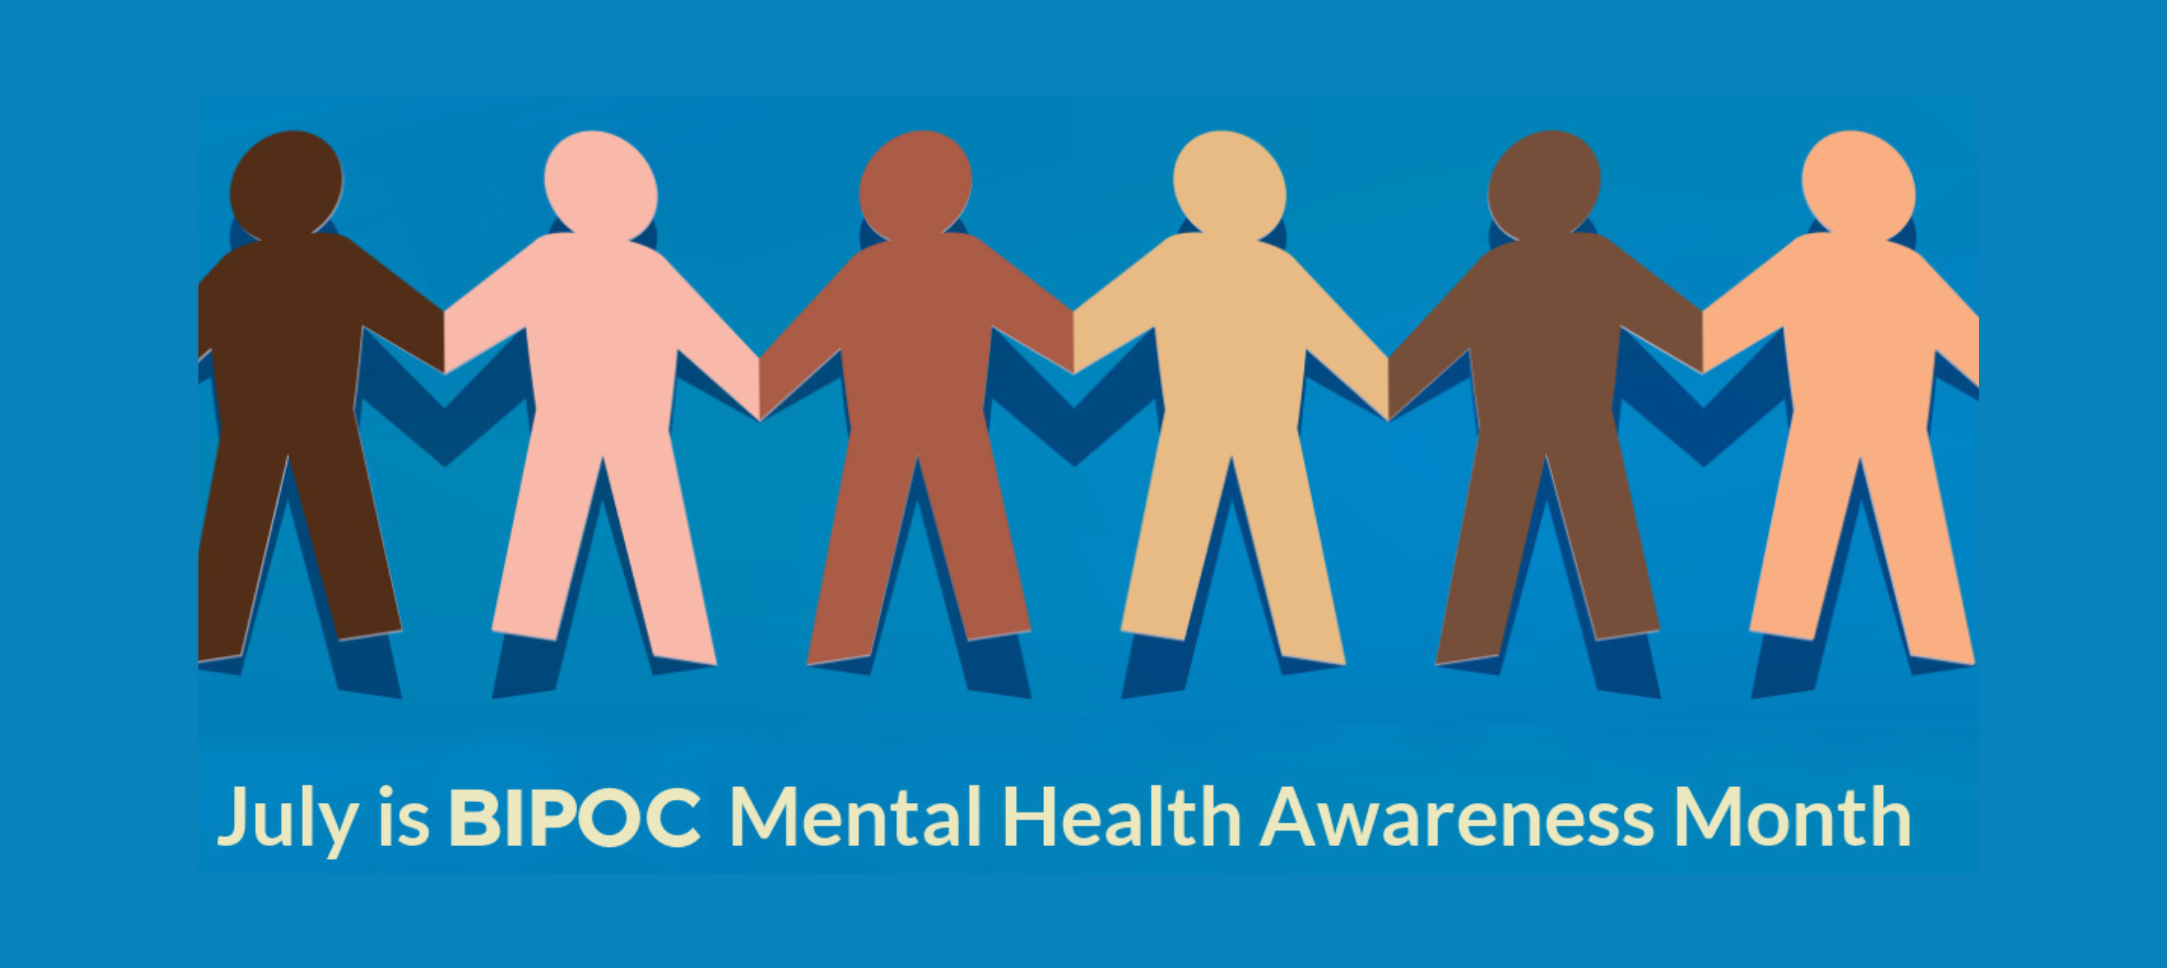 July is BIPOC Mental Health Awareness Month (Black, Indigenous, Persons of Color)